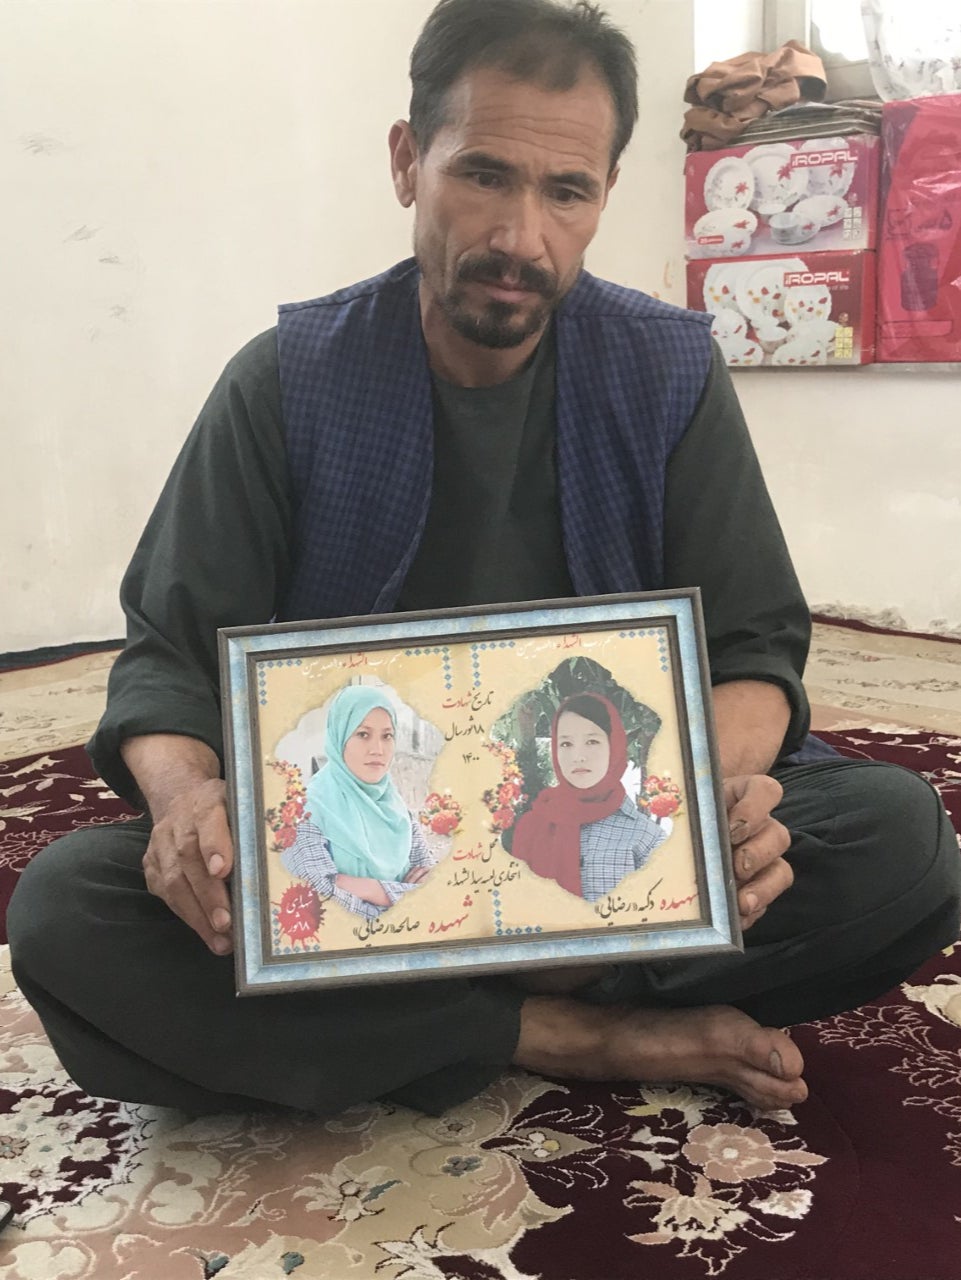 Rajab Ali Razayee holds a picture of his two daughters, who were killed in a school bombing in May